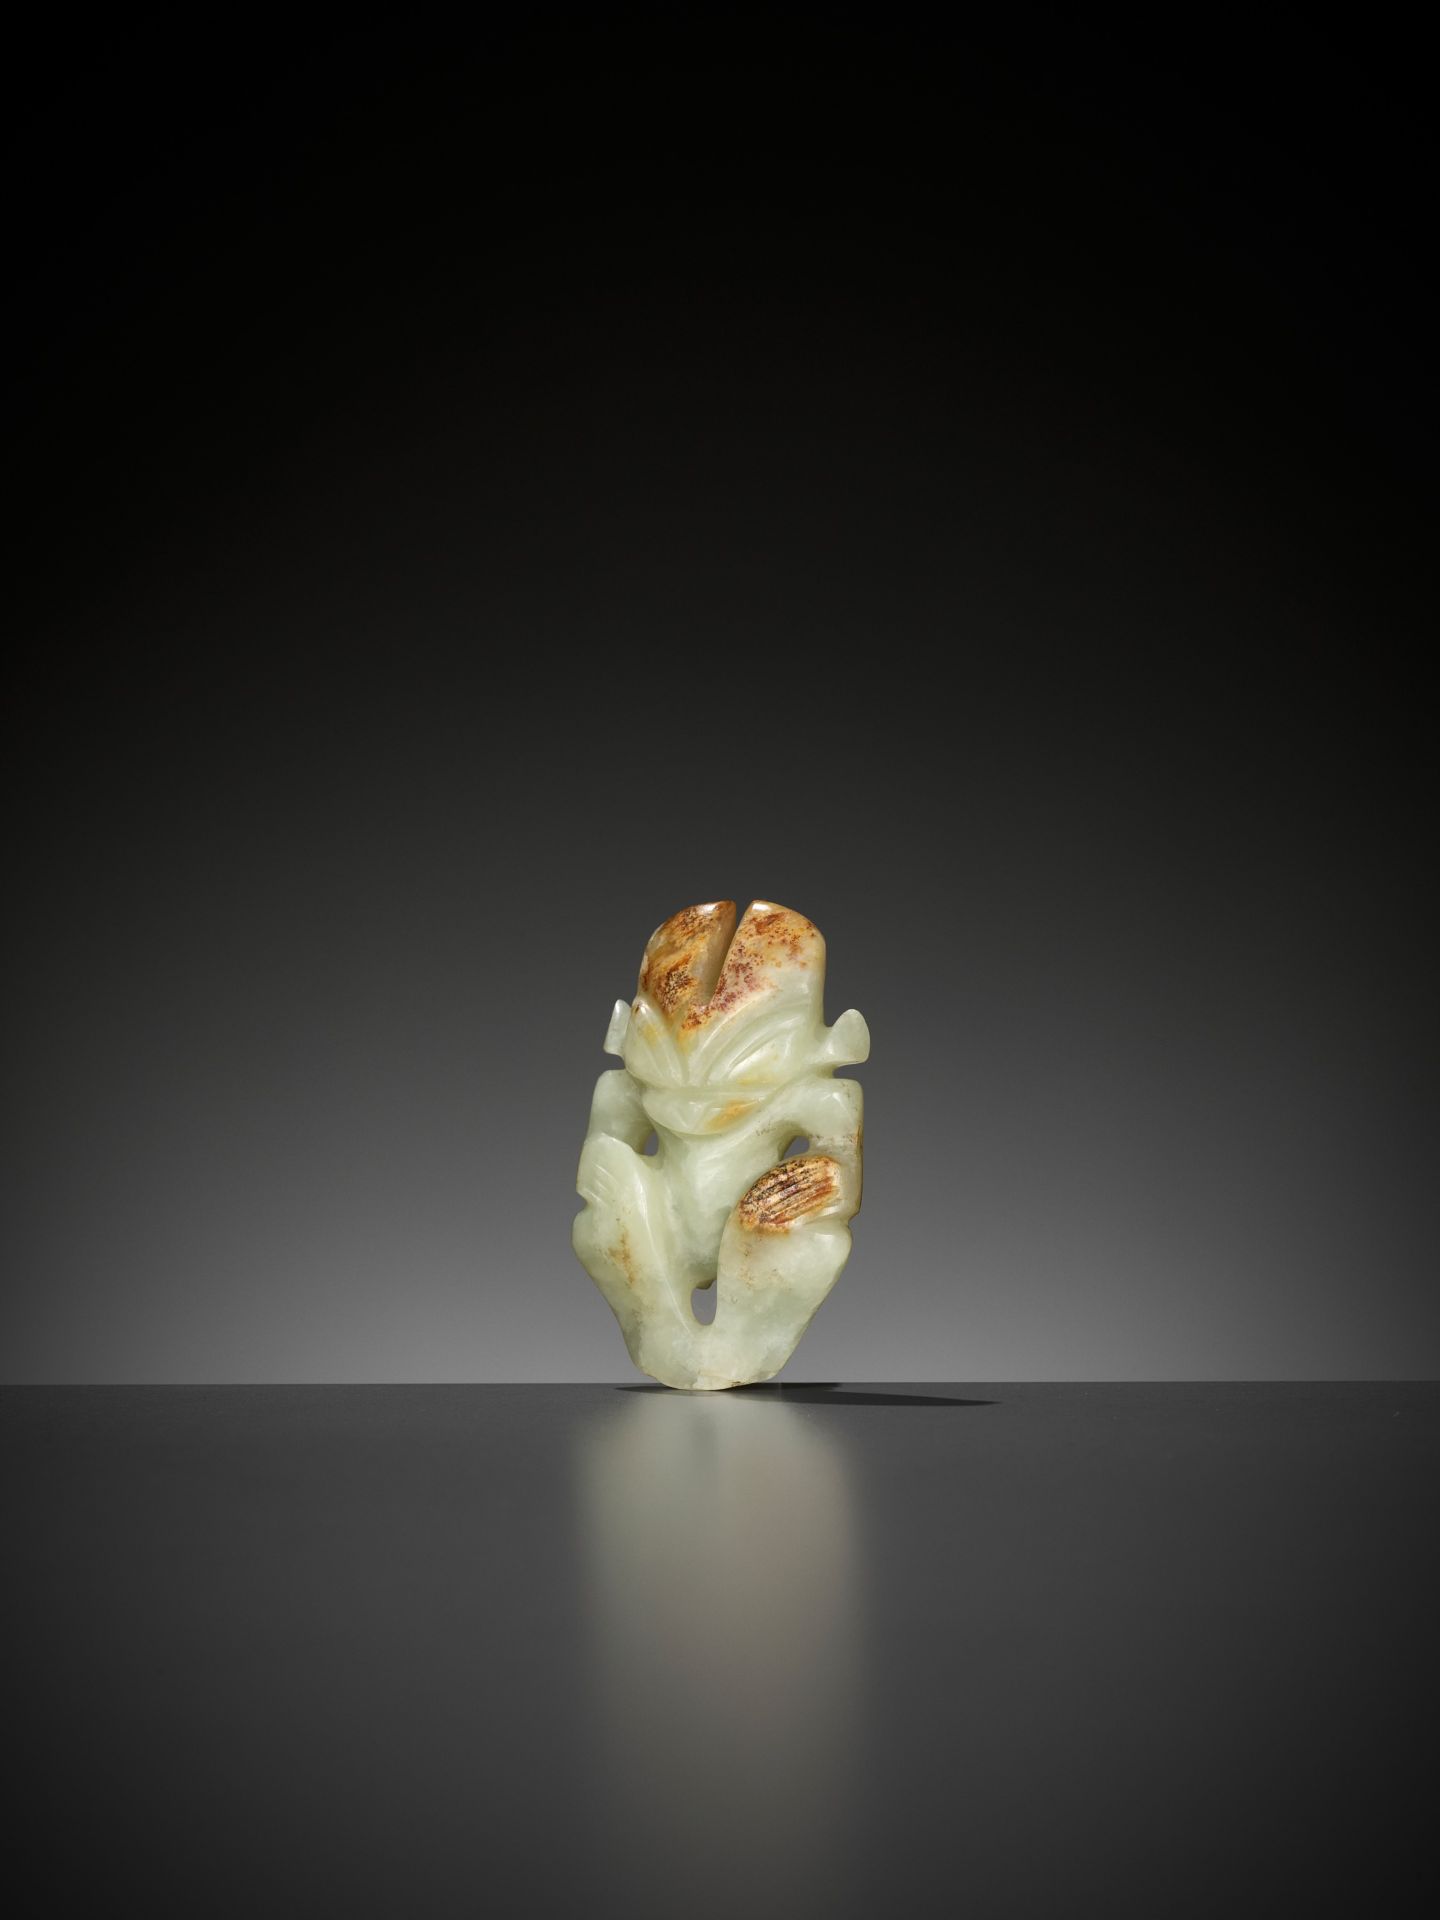 A RARE YELLOW AND RUSSET JADE 'HUMANOID FIGURE' PENDANT, HONGSHAN CULTURE - Image 2 of 10